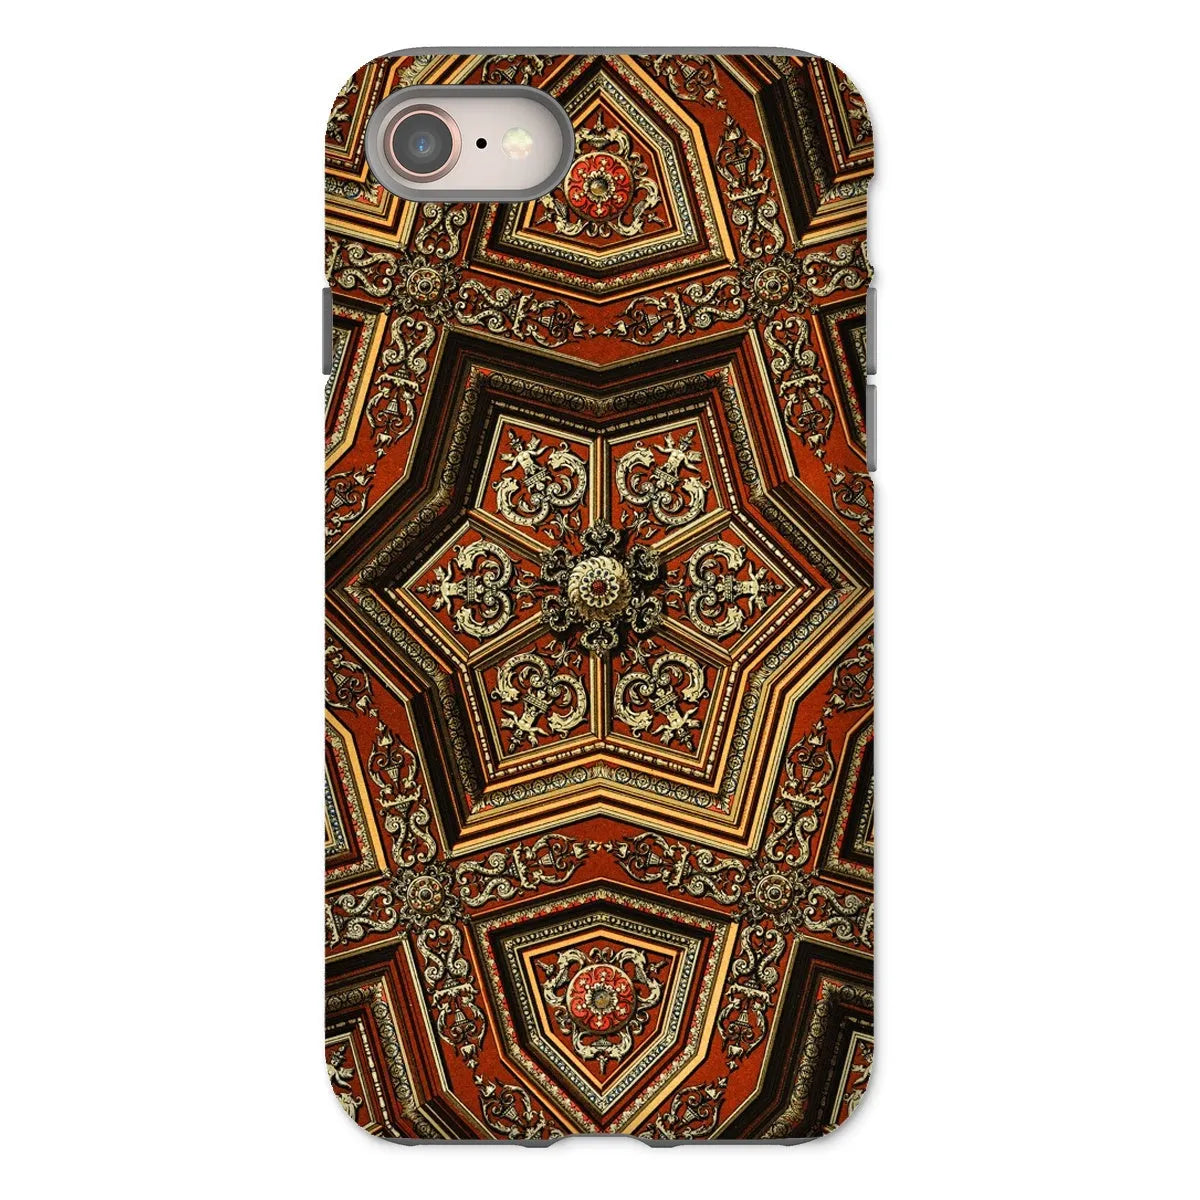 Renaissance Pattern By Auguste Racinet Tough Phone Case - Iphone 8 / Gloss - Mobile Phone Cases - Aesthetic Art